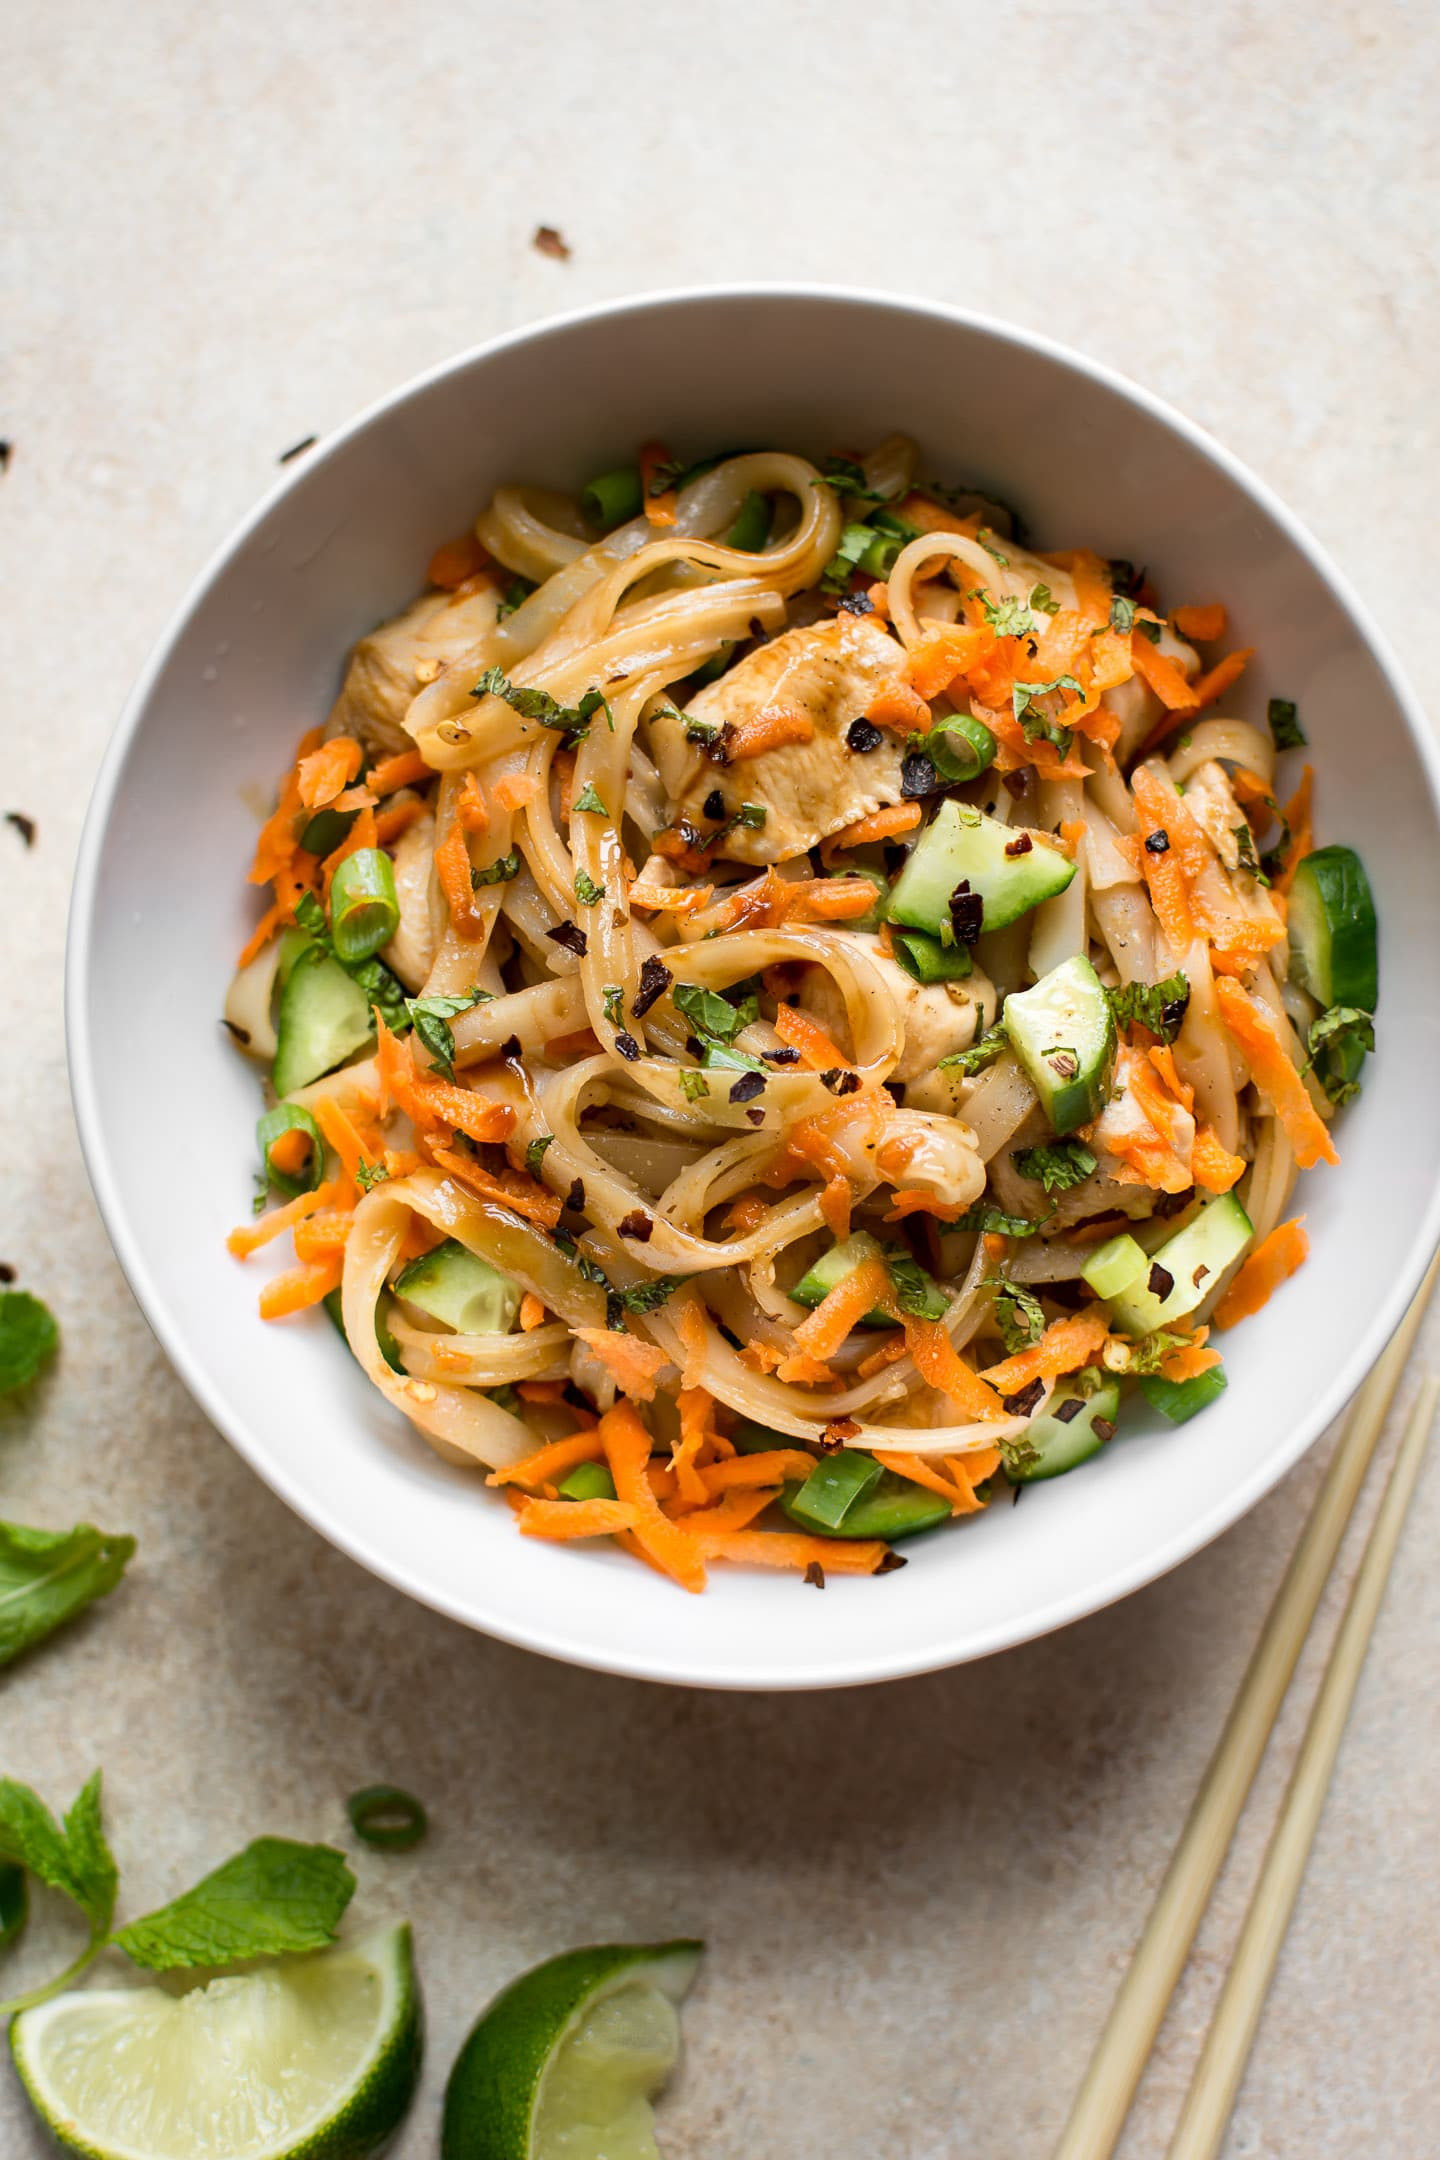 Recipes With Rice Noodles
 Chicken Stir Fry with Rice Noodles • Salt & Lavender